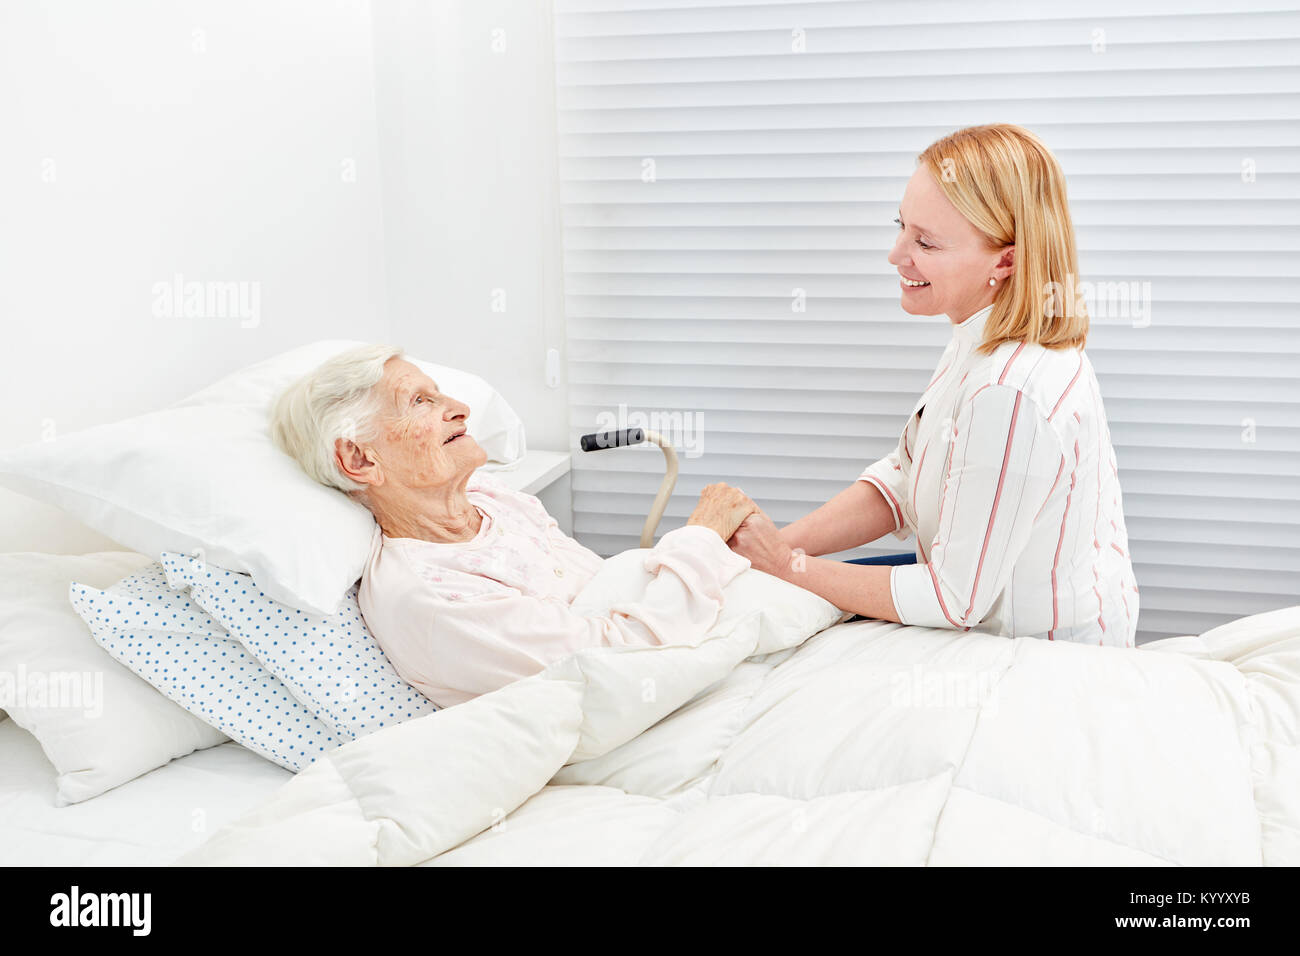 Woman makes a medical visit to bedridden senior citizen in the hospital Stock Photo